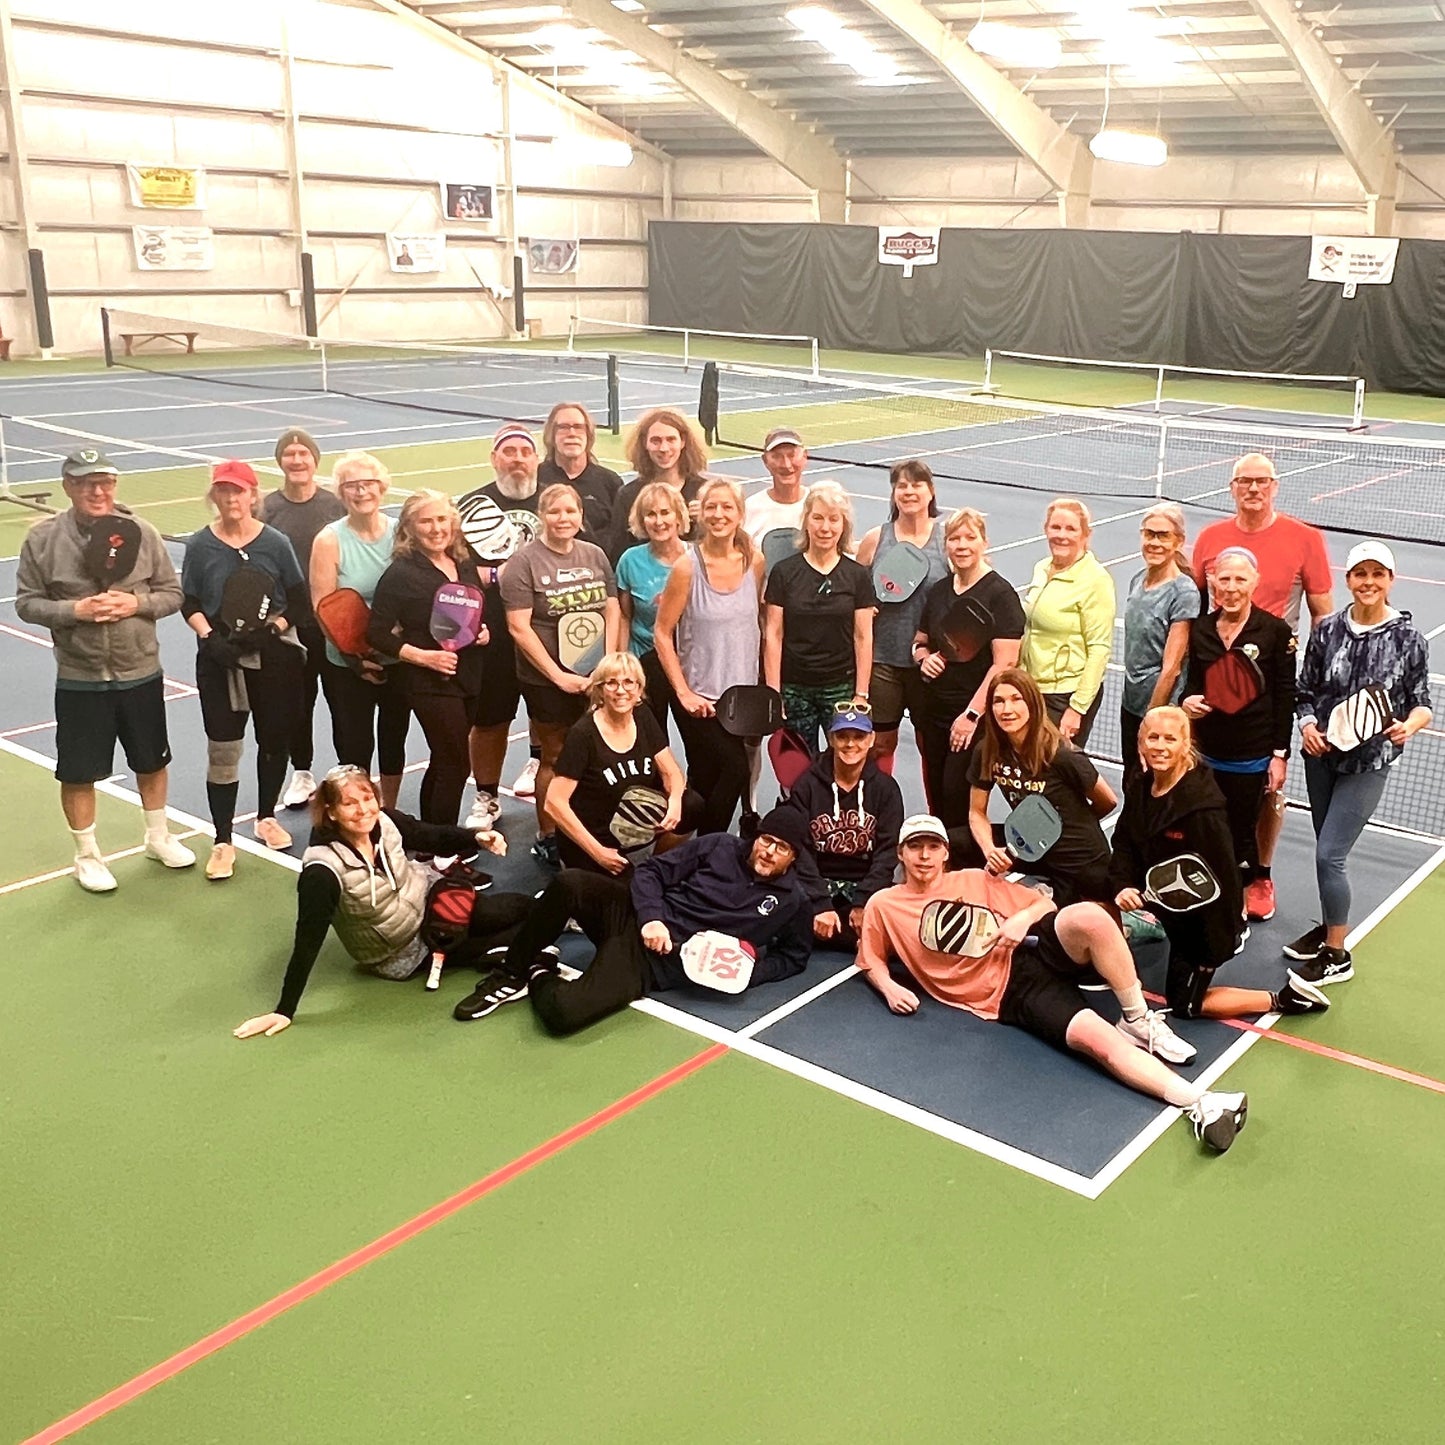 "Intenzivní" Holiday Pickleball Camp Pacific County Residents December 17 - 18, 2024